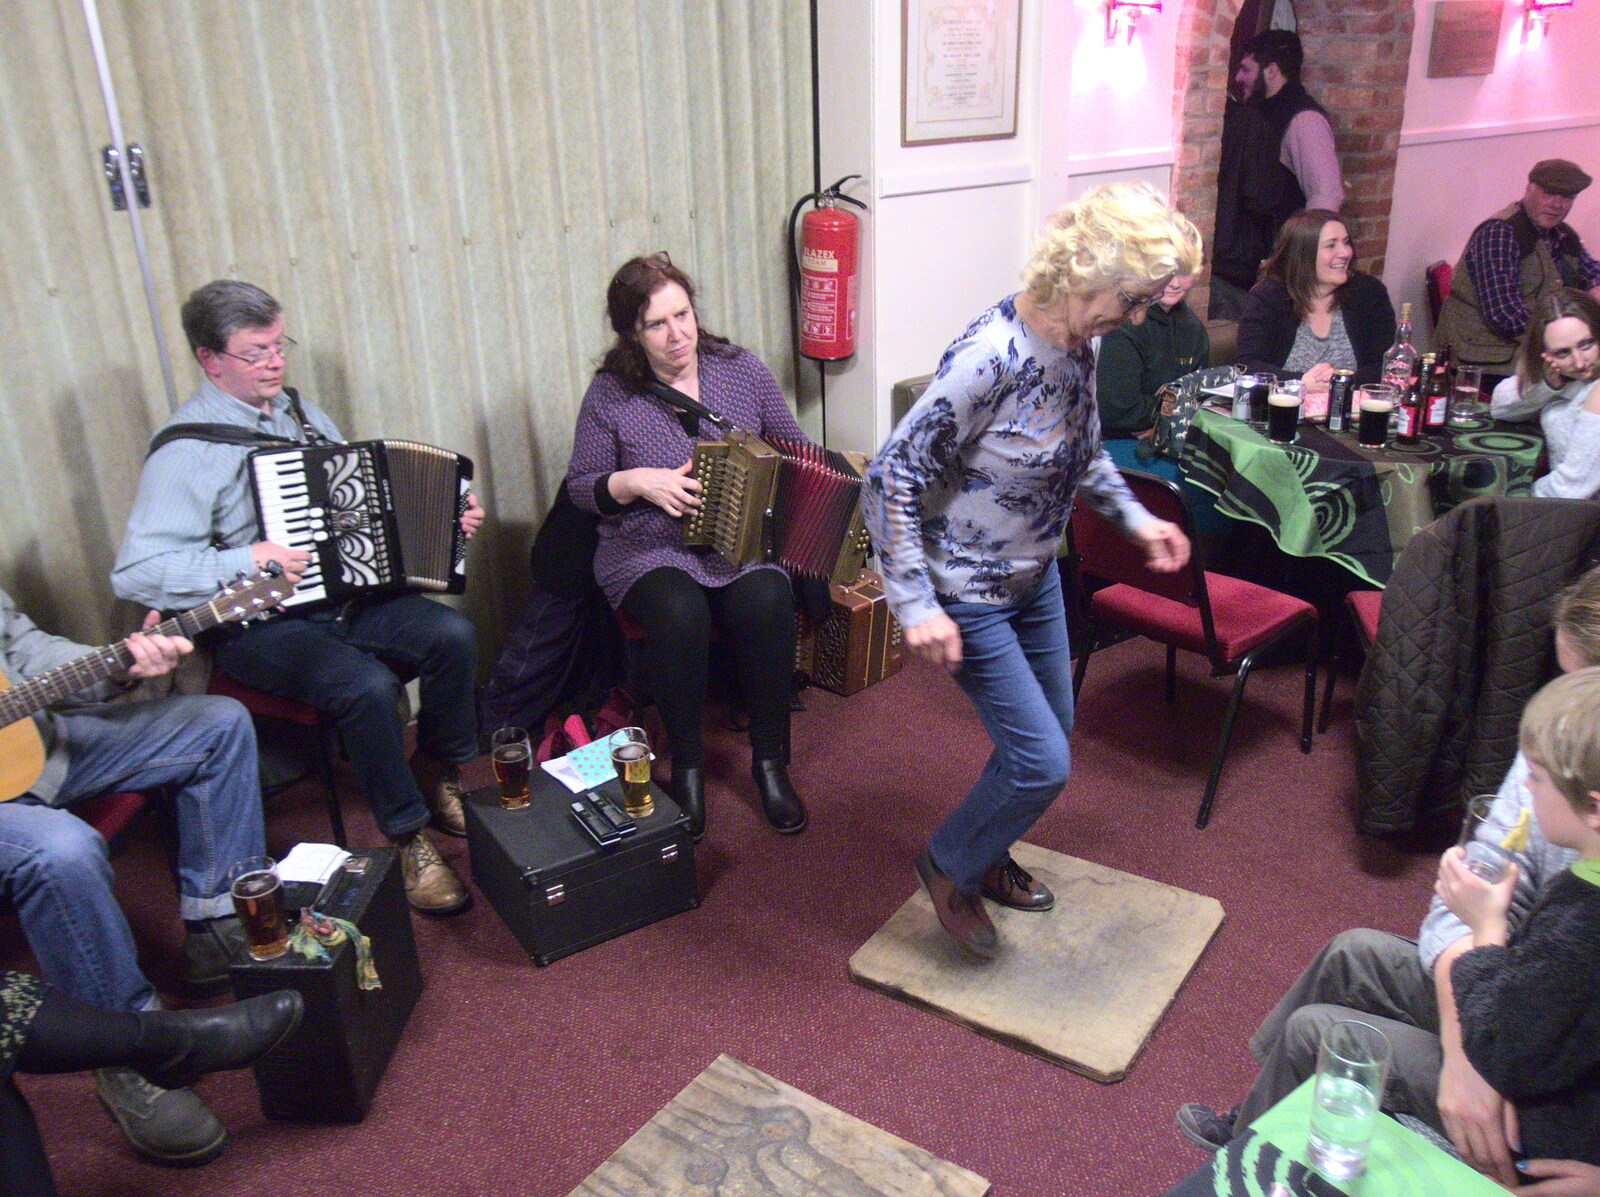 A bit of dancing on boards occurs from St. Patrick's Day at the Village Hall, Brome, Suffolk - 16th March 2018